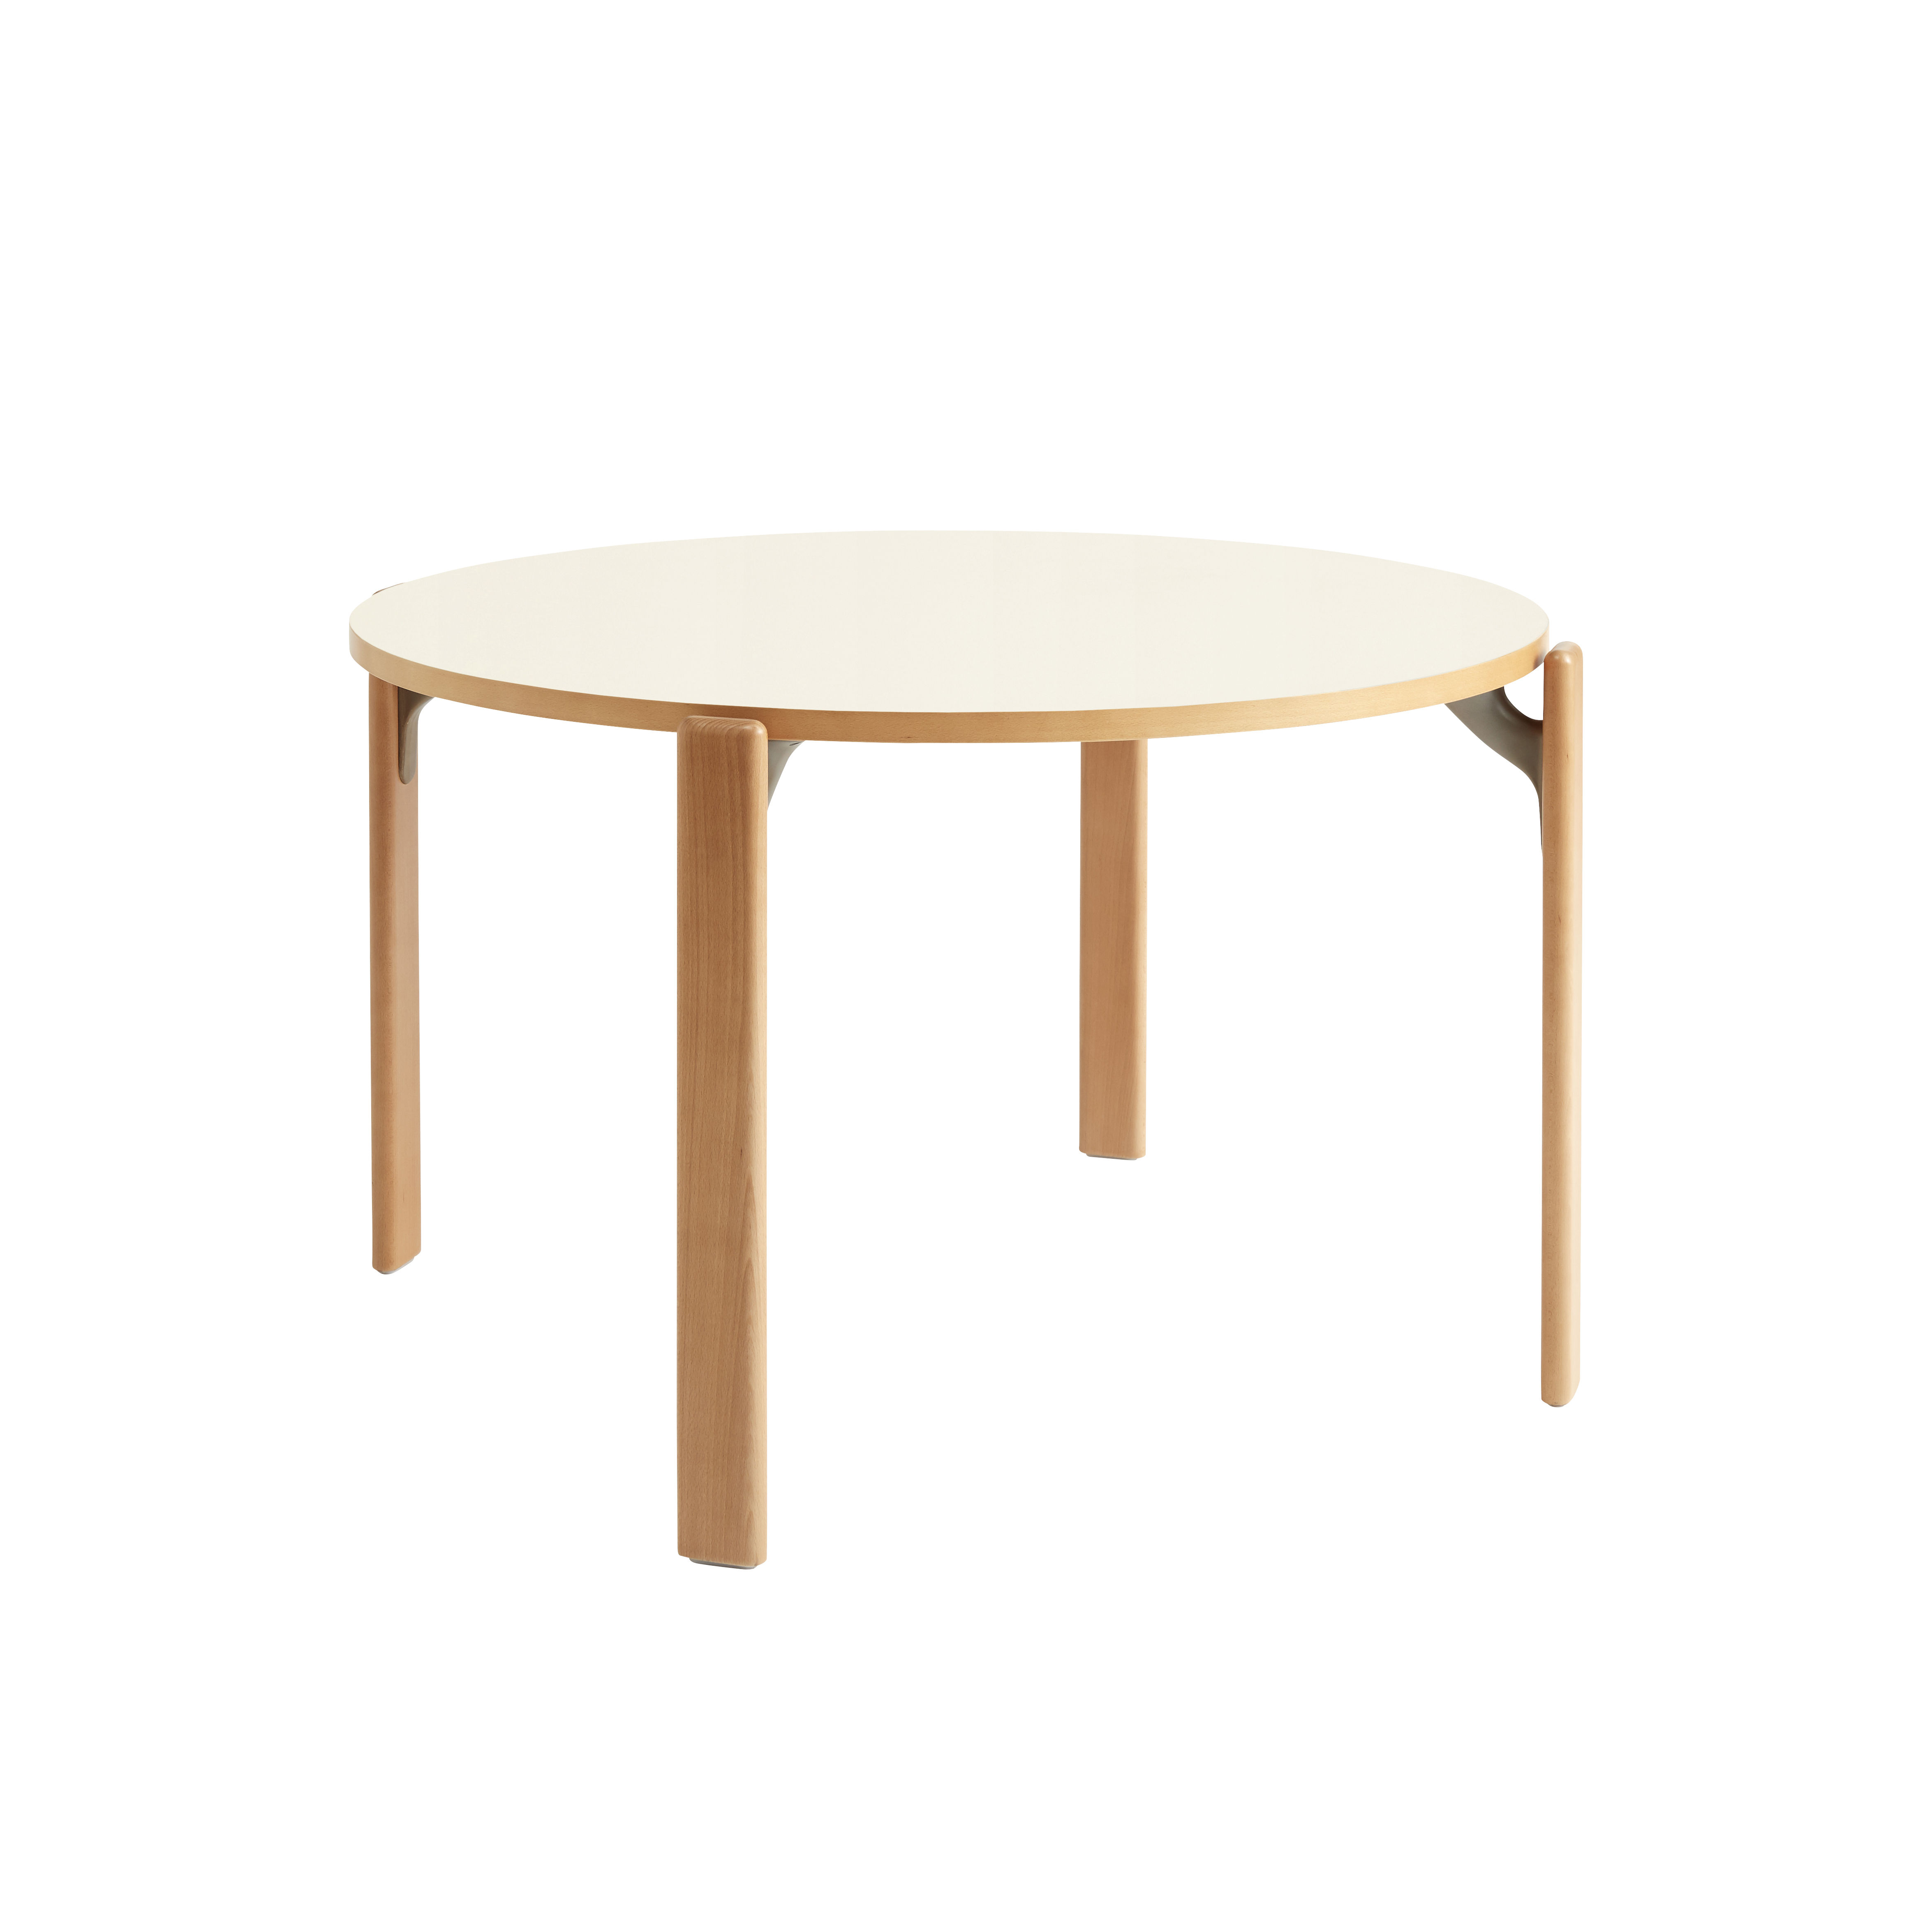 Hay Rey Round table - Beige/Natural wood | Made In Design UK